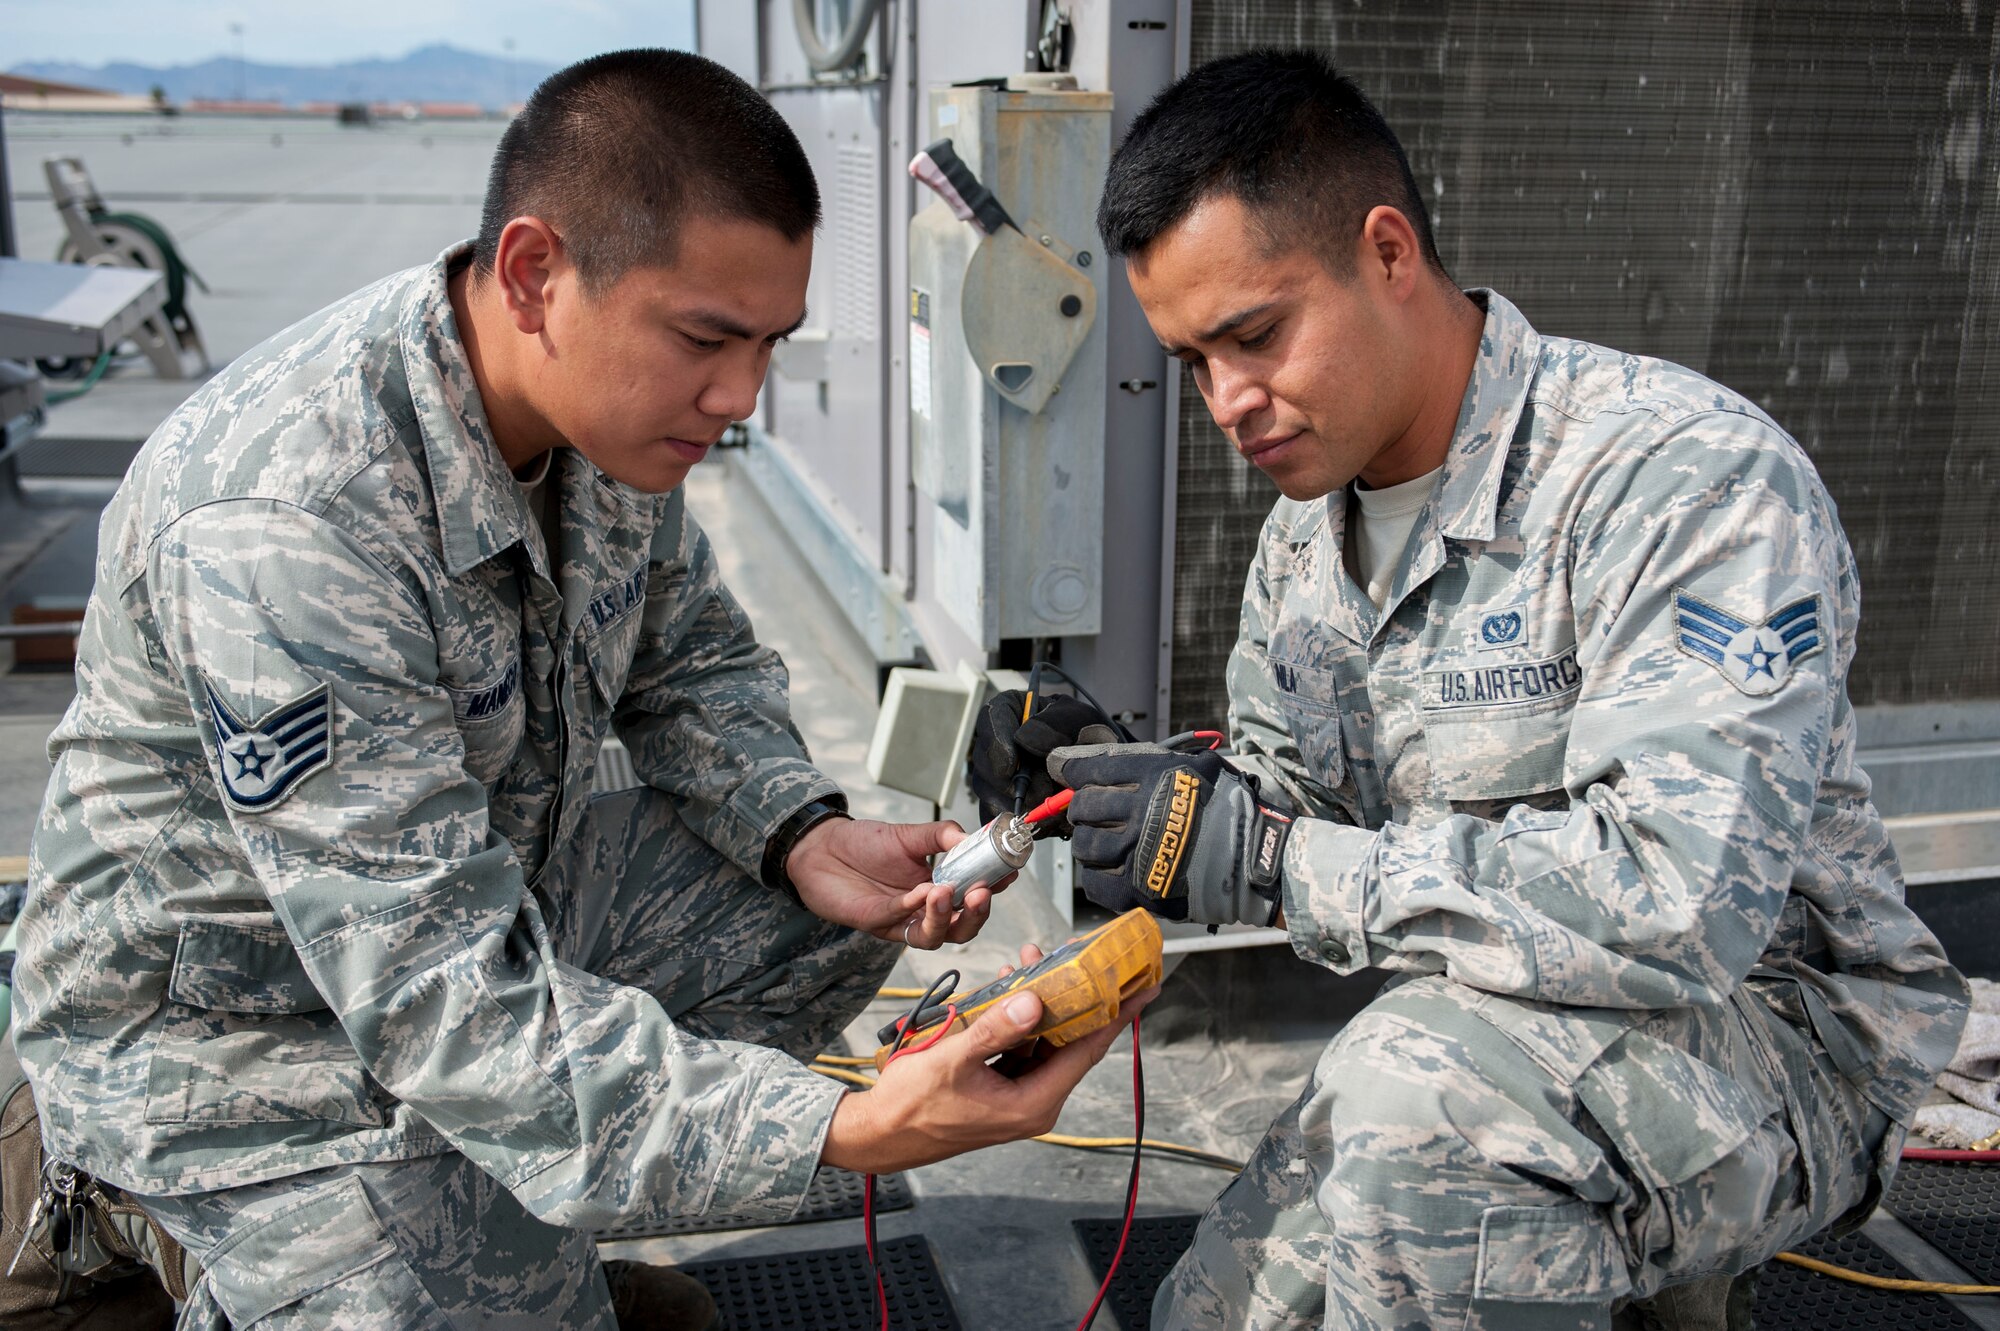 Staff Sgt. Dads Zyron Maniego, 99th Civil Engineer Squadron Heating, Ventilating, and Air Conditioning technician, and Senior Airman Octavio Nila 99th CES HVAC technician, check readings on a part used for an A/C unit atop of the Base Exchange on Nellis Air Force Base, Nev., June 28, 2016. After receiving 112 emergency calls last week, HVAC were able to fix and reset each unit atop of the BX within a 24 hour time frame.